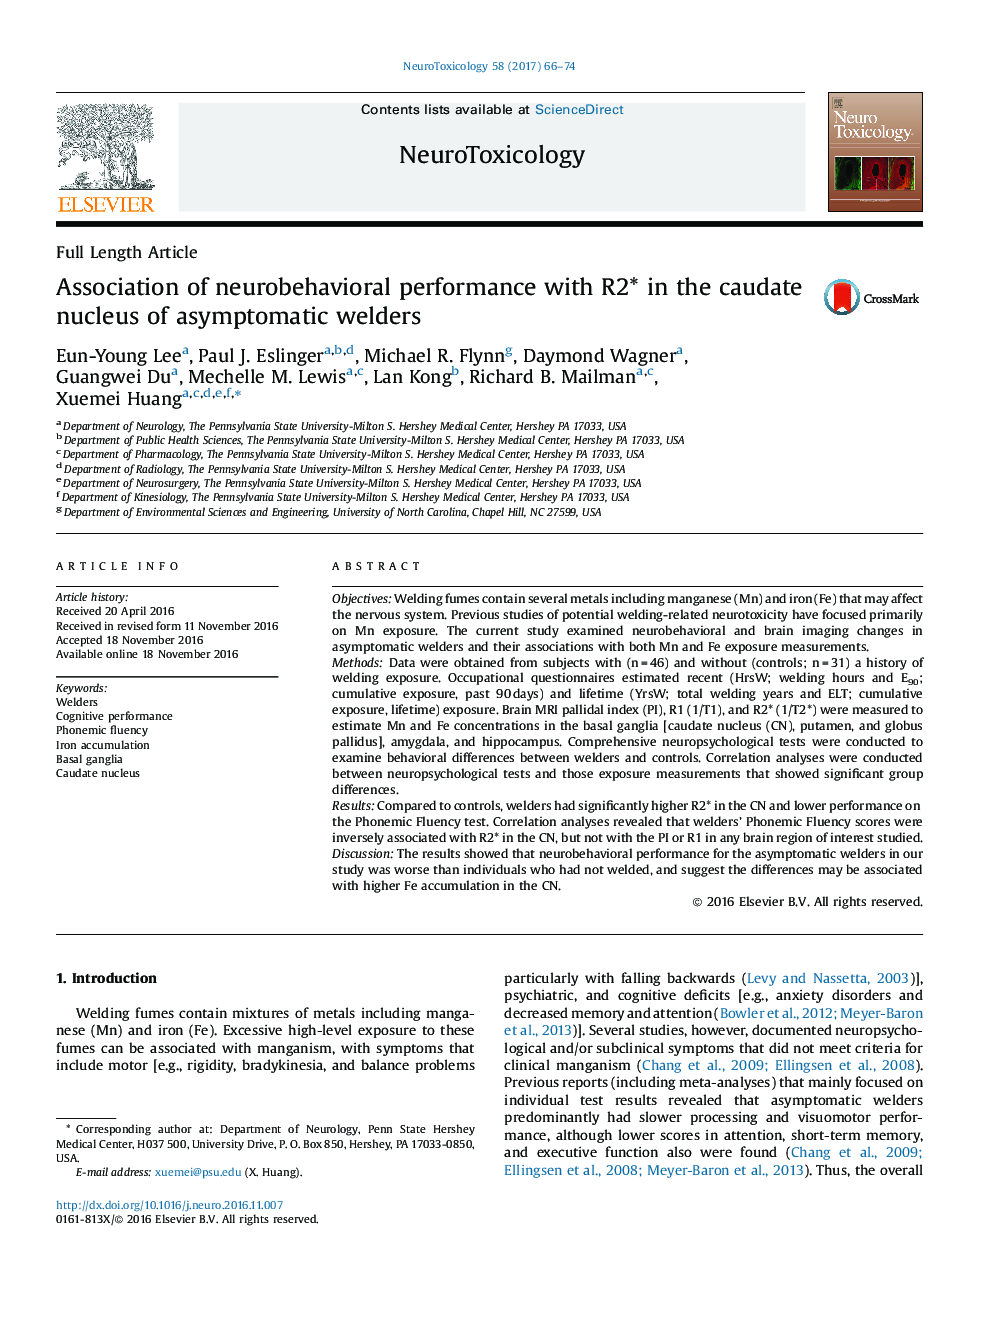 Association of neurobehavioral performance with R2* in the caudate nucleus of asymptomatic welders